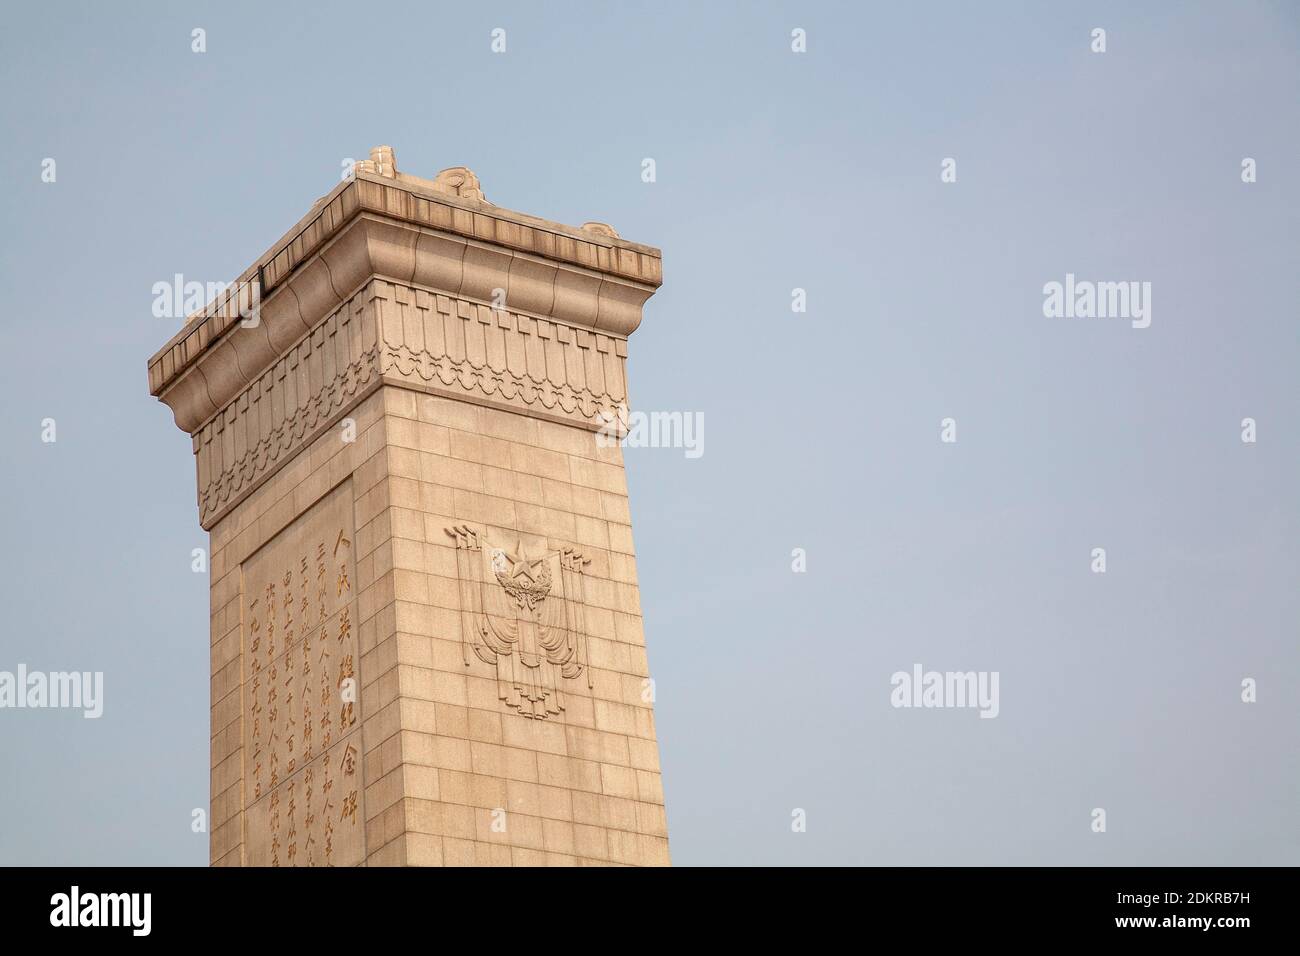 Monument to the People's Heroes in Tiananmen Square or Tian'anmen Square Stock Photo